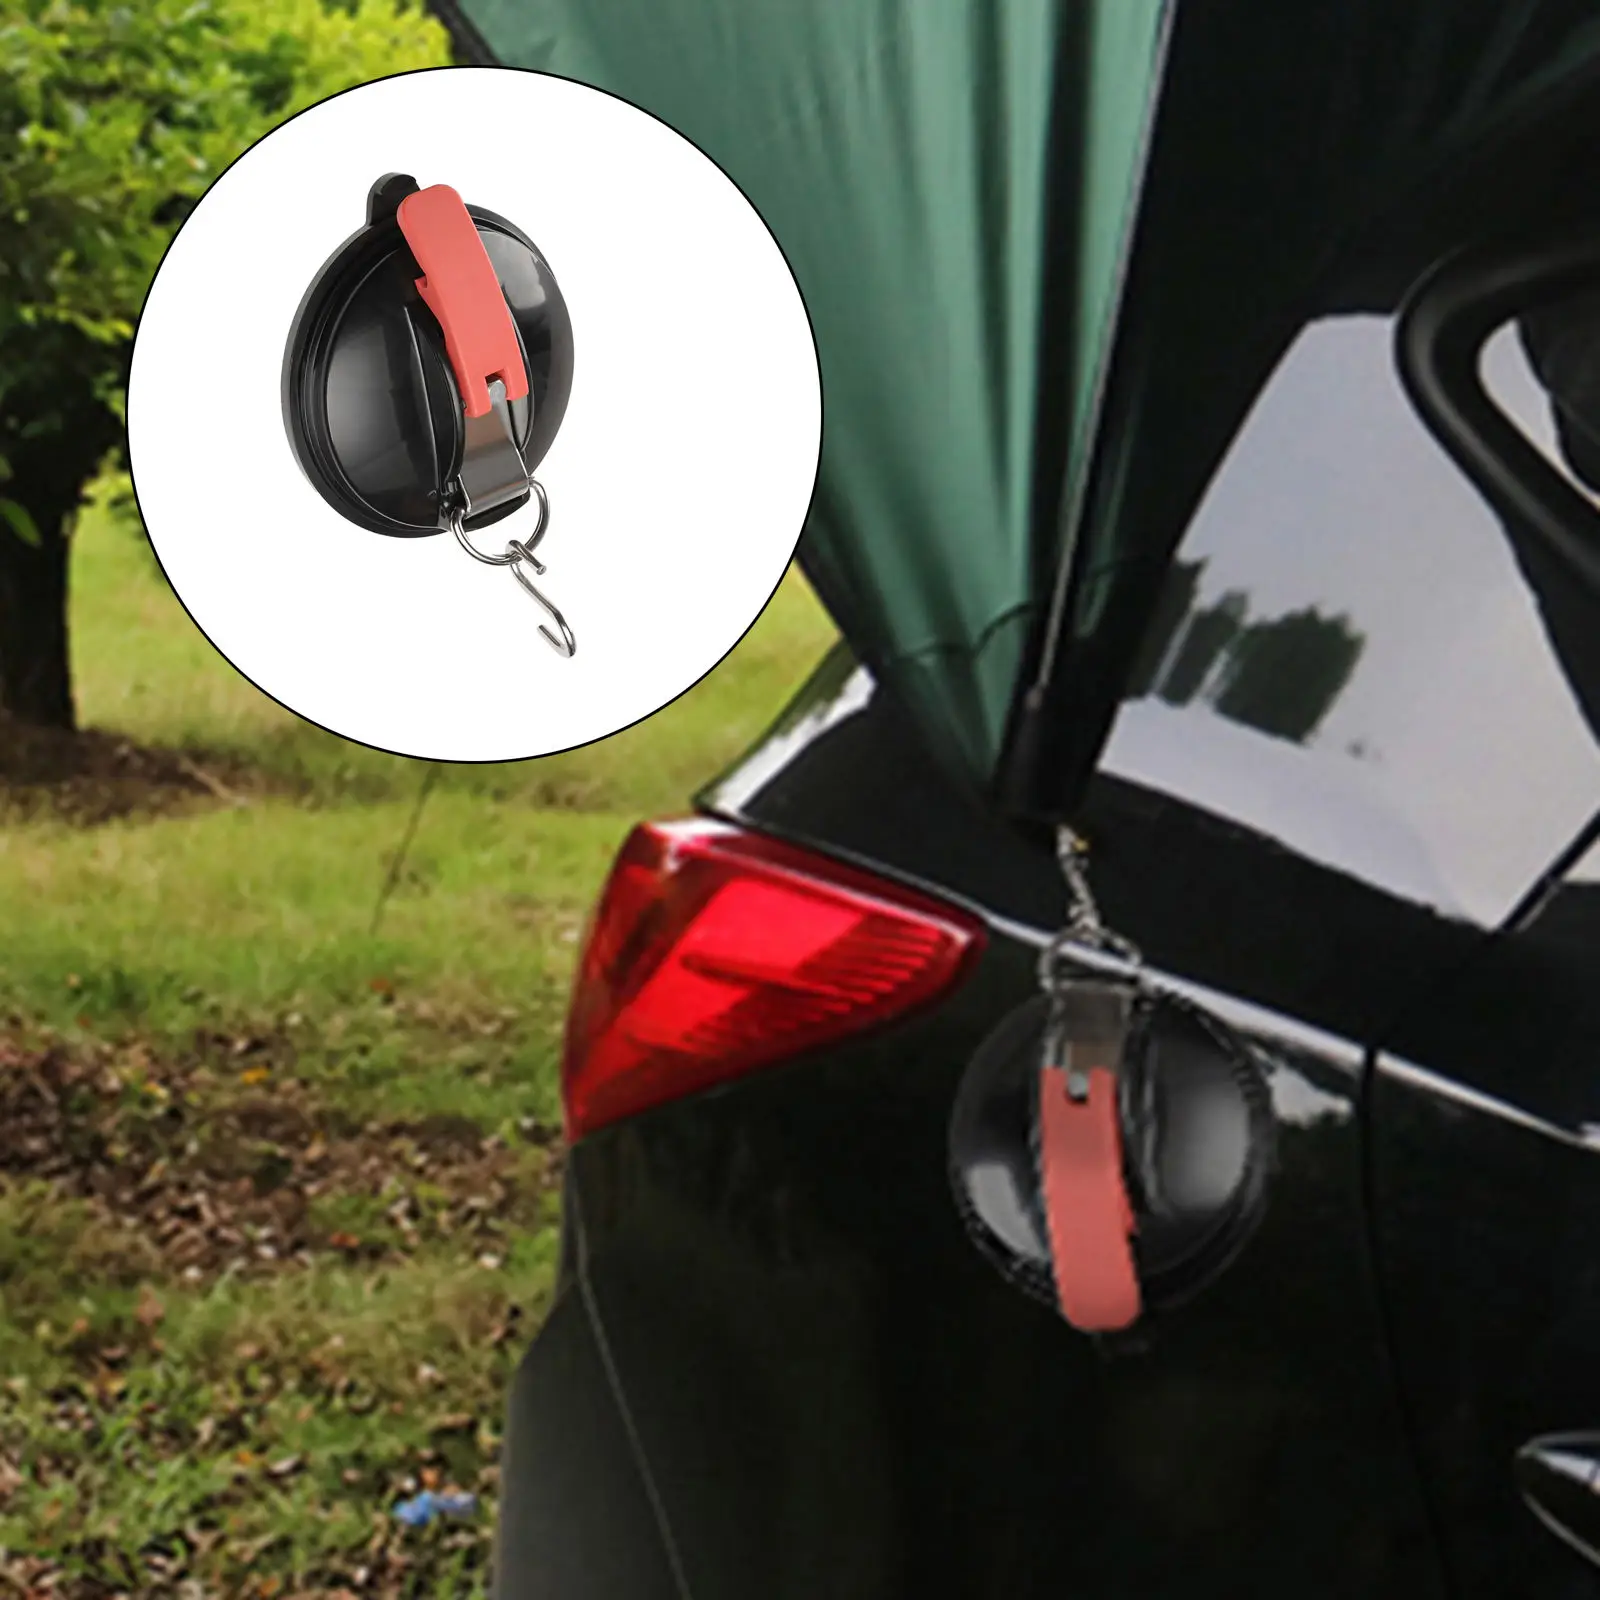 1x Suction Cup Anchor Heavy Duty Tie Down Car Mount Luggage Tarps Tents with Securing Hook Universal for Car Truck